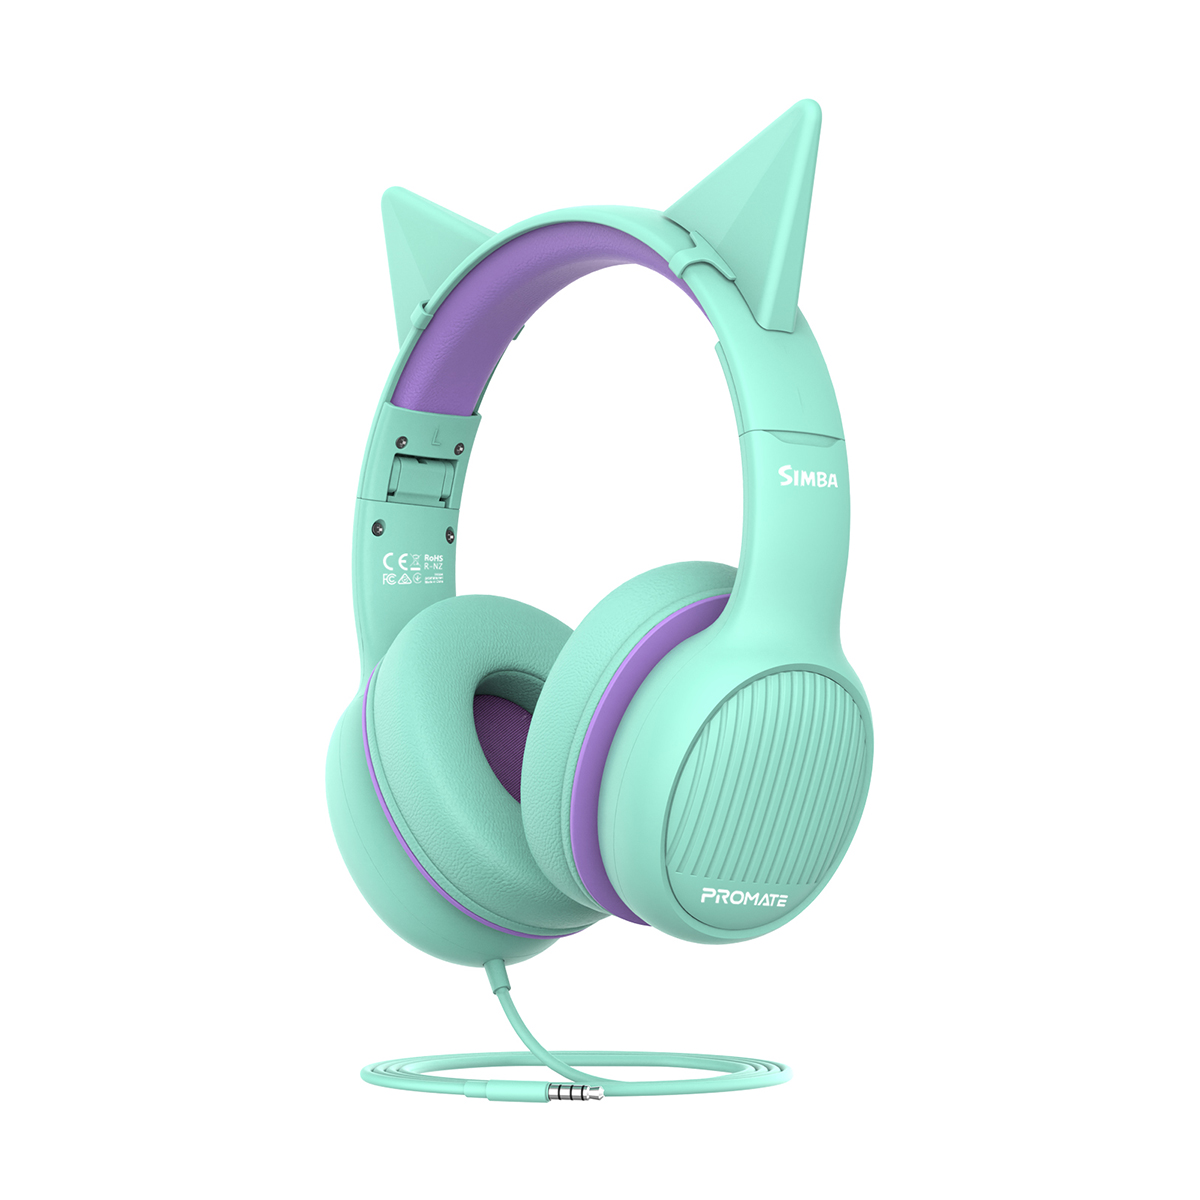 Promate Kids Headset with 85Db Volume Control, Removable Cat Ears, 1.2m Cable and Audio Share Port, Simba Emerald